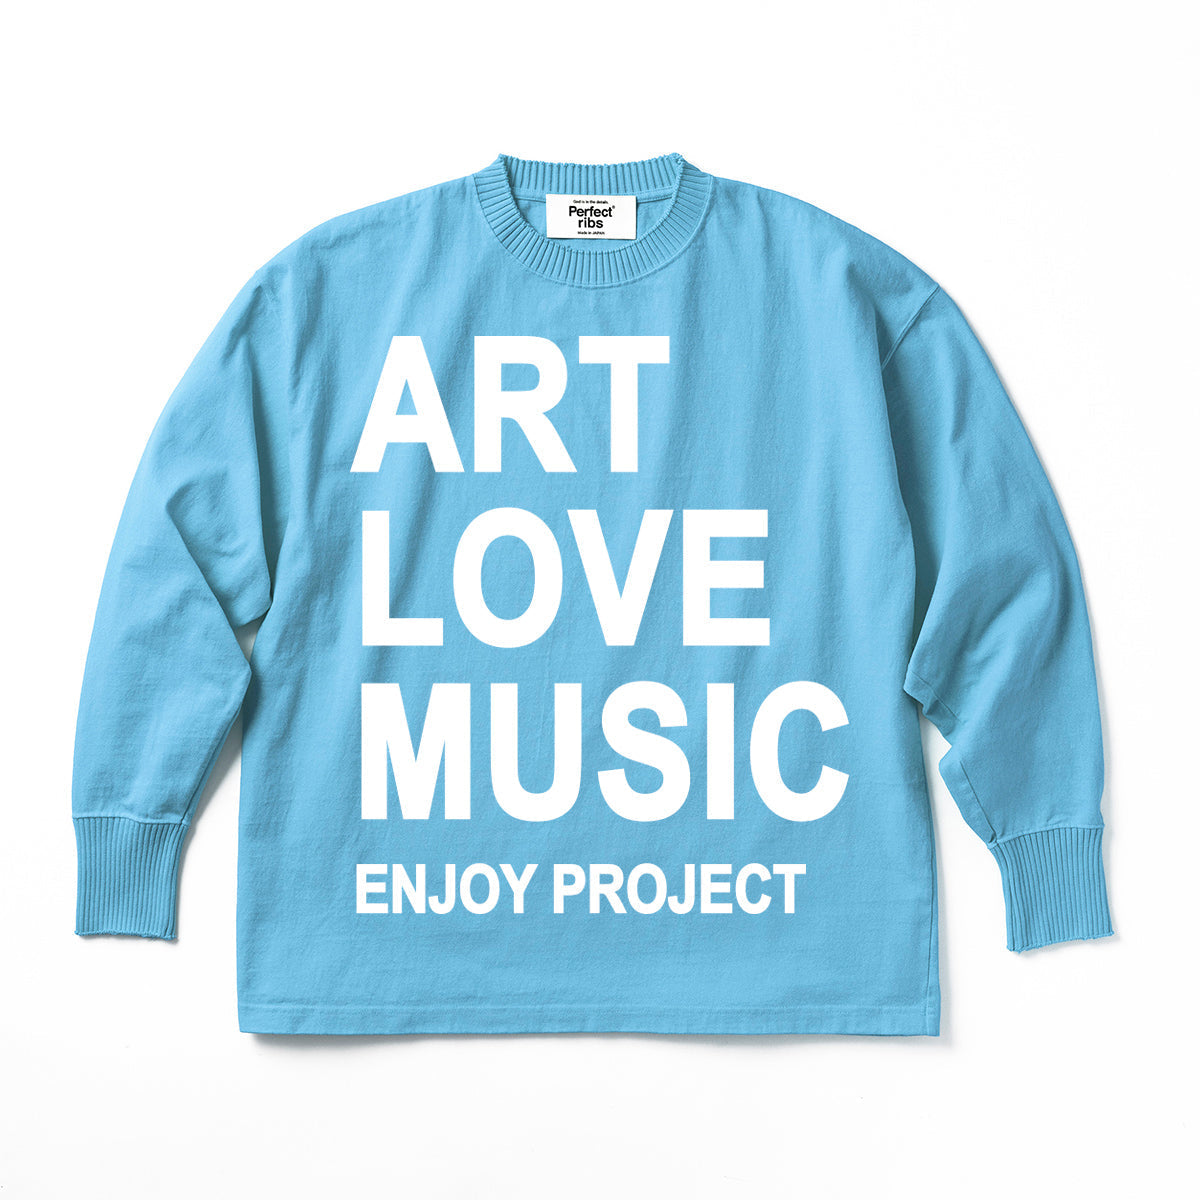 Exclusive Color【Perfect ribs®︎×A LOVE MOVEMENT】 "ART LOVE MUSIC" Basic Long Sleeve T Shirt / Sax×White